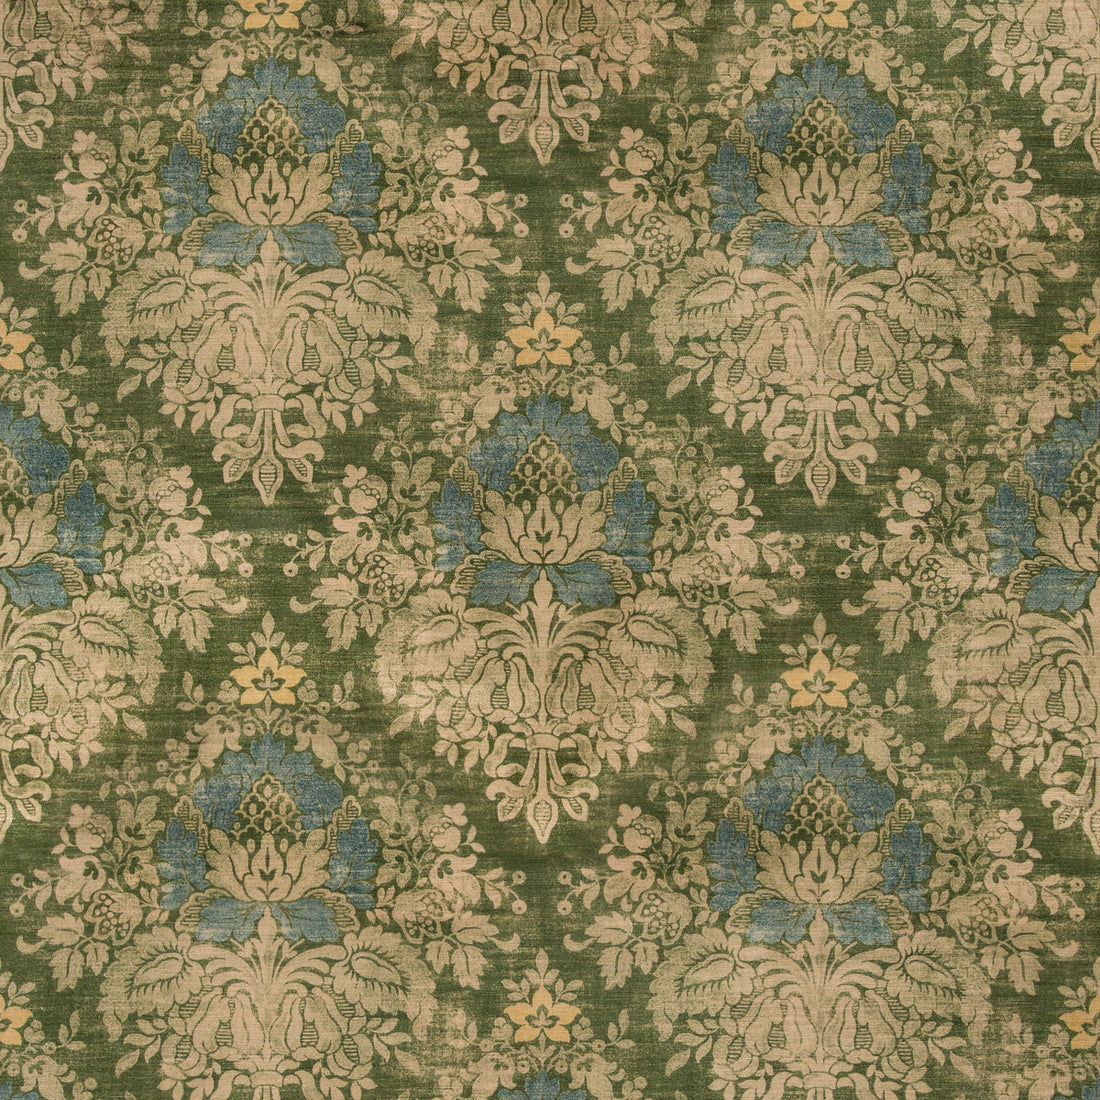 Alma Velvet fabric in loden color - pattern 2019122.35.0 - by Lee Jofa in the Harlington Velvets collection